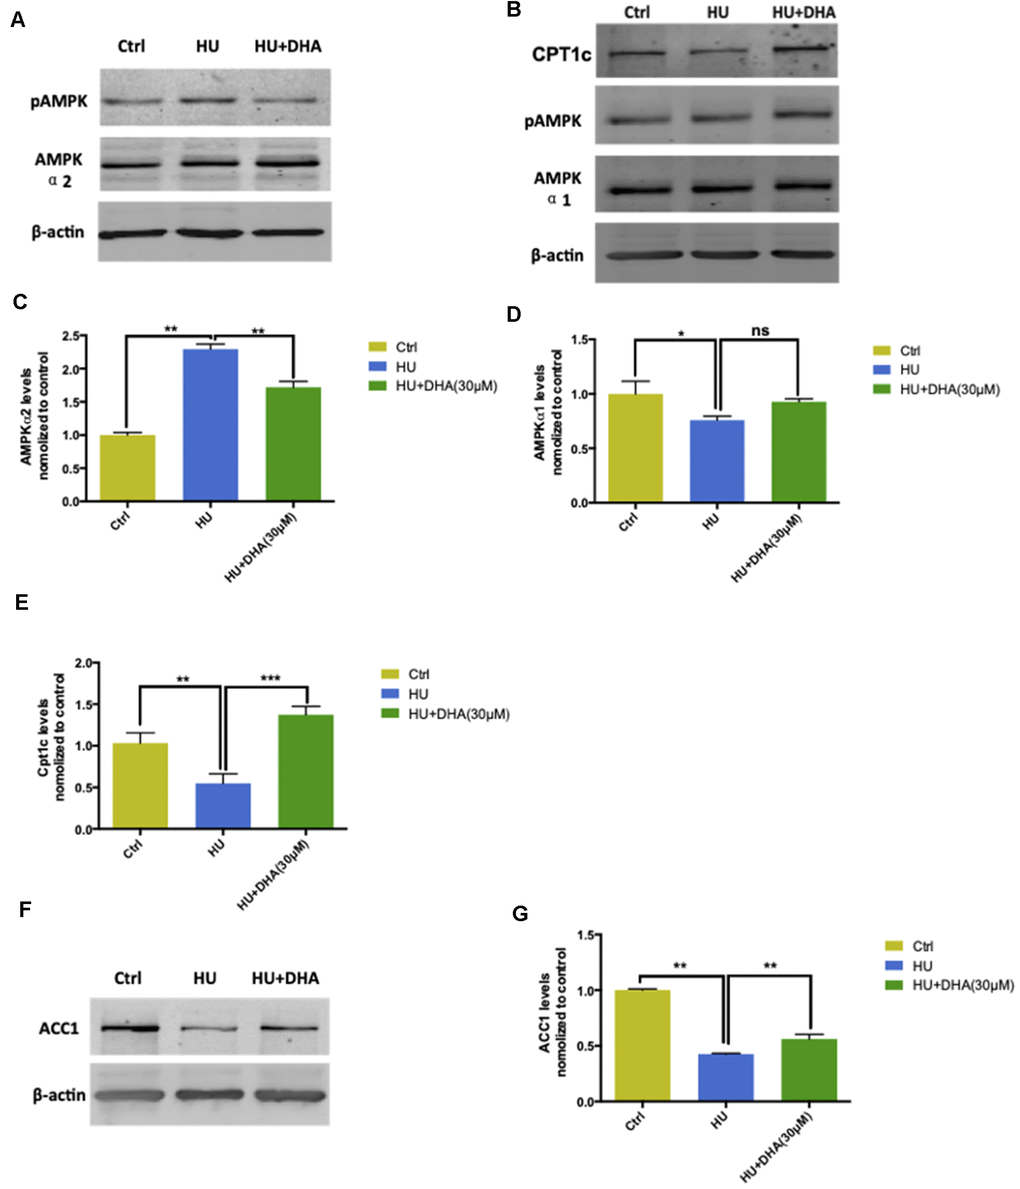 AMPK/ACC/CPT1 pathway was involved in membrane aging processes. Membrane aging activated protein expression of AMPK-α2 through Ser485/491 residue phosphorylation by DHA treatment. However, AMPK-α1 showed no significant change in the protein expression level (A, B). Membrane aging also increased AMPK-α2 mRNA levels (P P C). AMPK-α1 mRNA levels decreased in the membrane aging group and slightly increased in the DHA treatment group (D). CPT1c protein and mRNA levels were also inhibited by membrane aging (P P B, E). The protein and mRNA expression of two downstream factors of AMPK were detected. Membrane aging inhibited the expression of ACC1 protein; DHA co-treatment comparatively increased the protein level (F). The ACC1 mRNA level followed the same trend, which was reduced by membrane aging (P P G). All the data are expressed as mean ± SD from three independent experiments (N = 3). *P **P ***P 